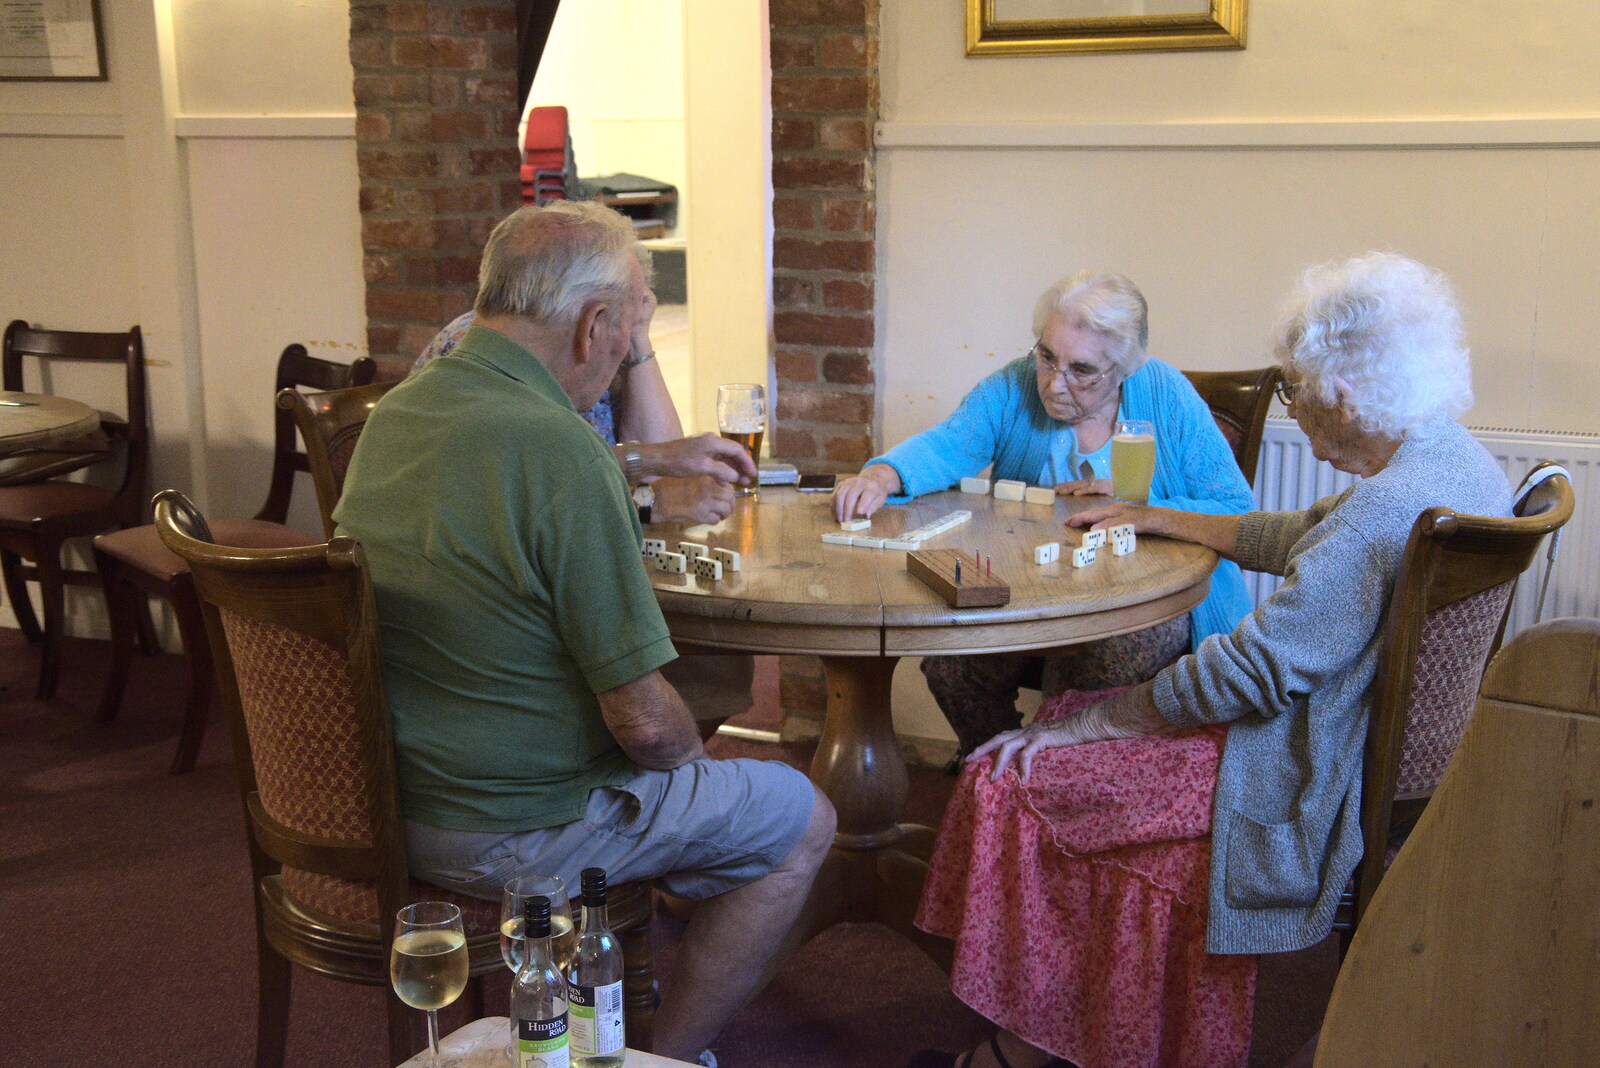 A Trip to Framlingham, Suffolk - 28th July 2022: A game of dominoes occurs